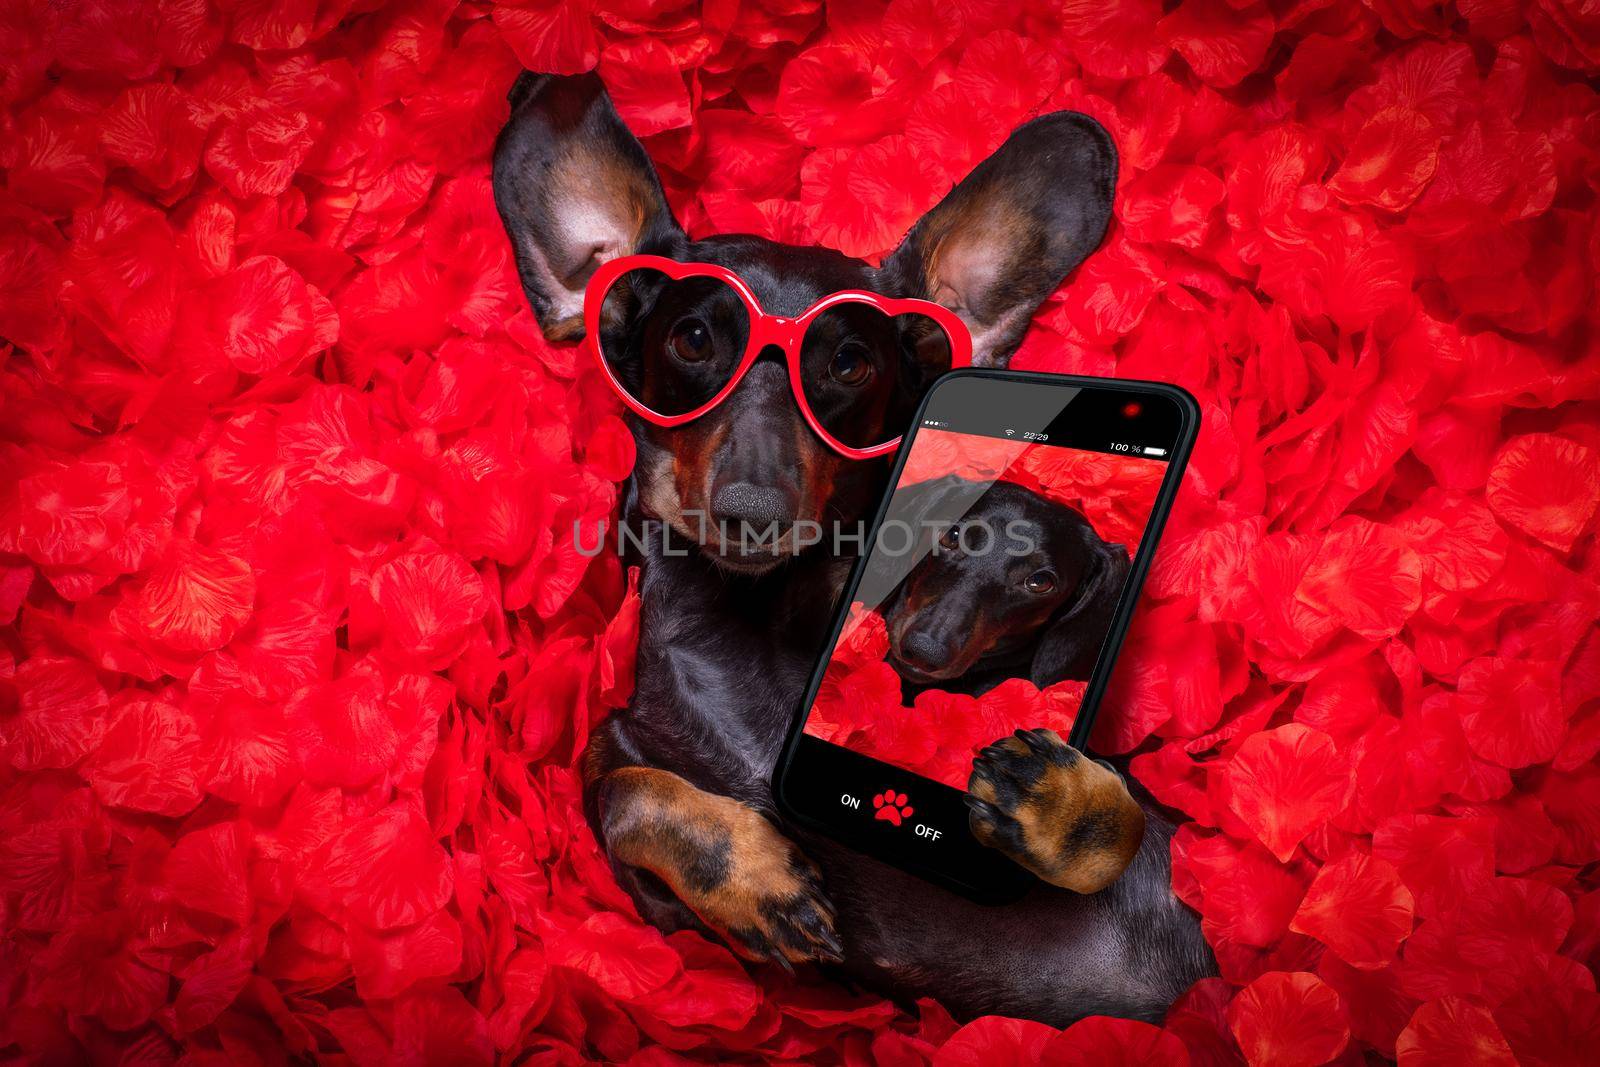 suasage  dachshund dog lying in bed full of red rose flower petals as background  , in love on valentines taking a selfie with smartphone